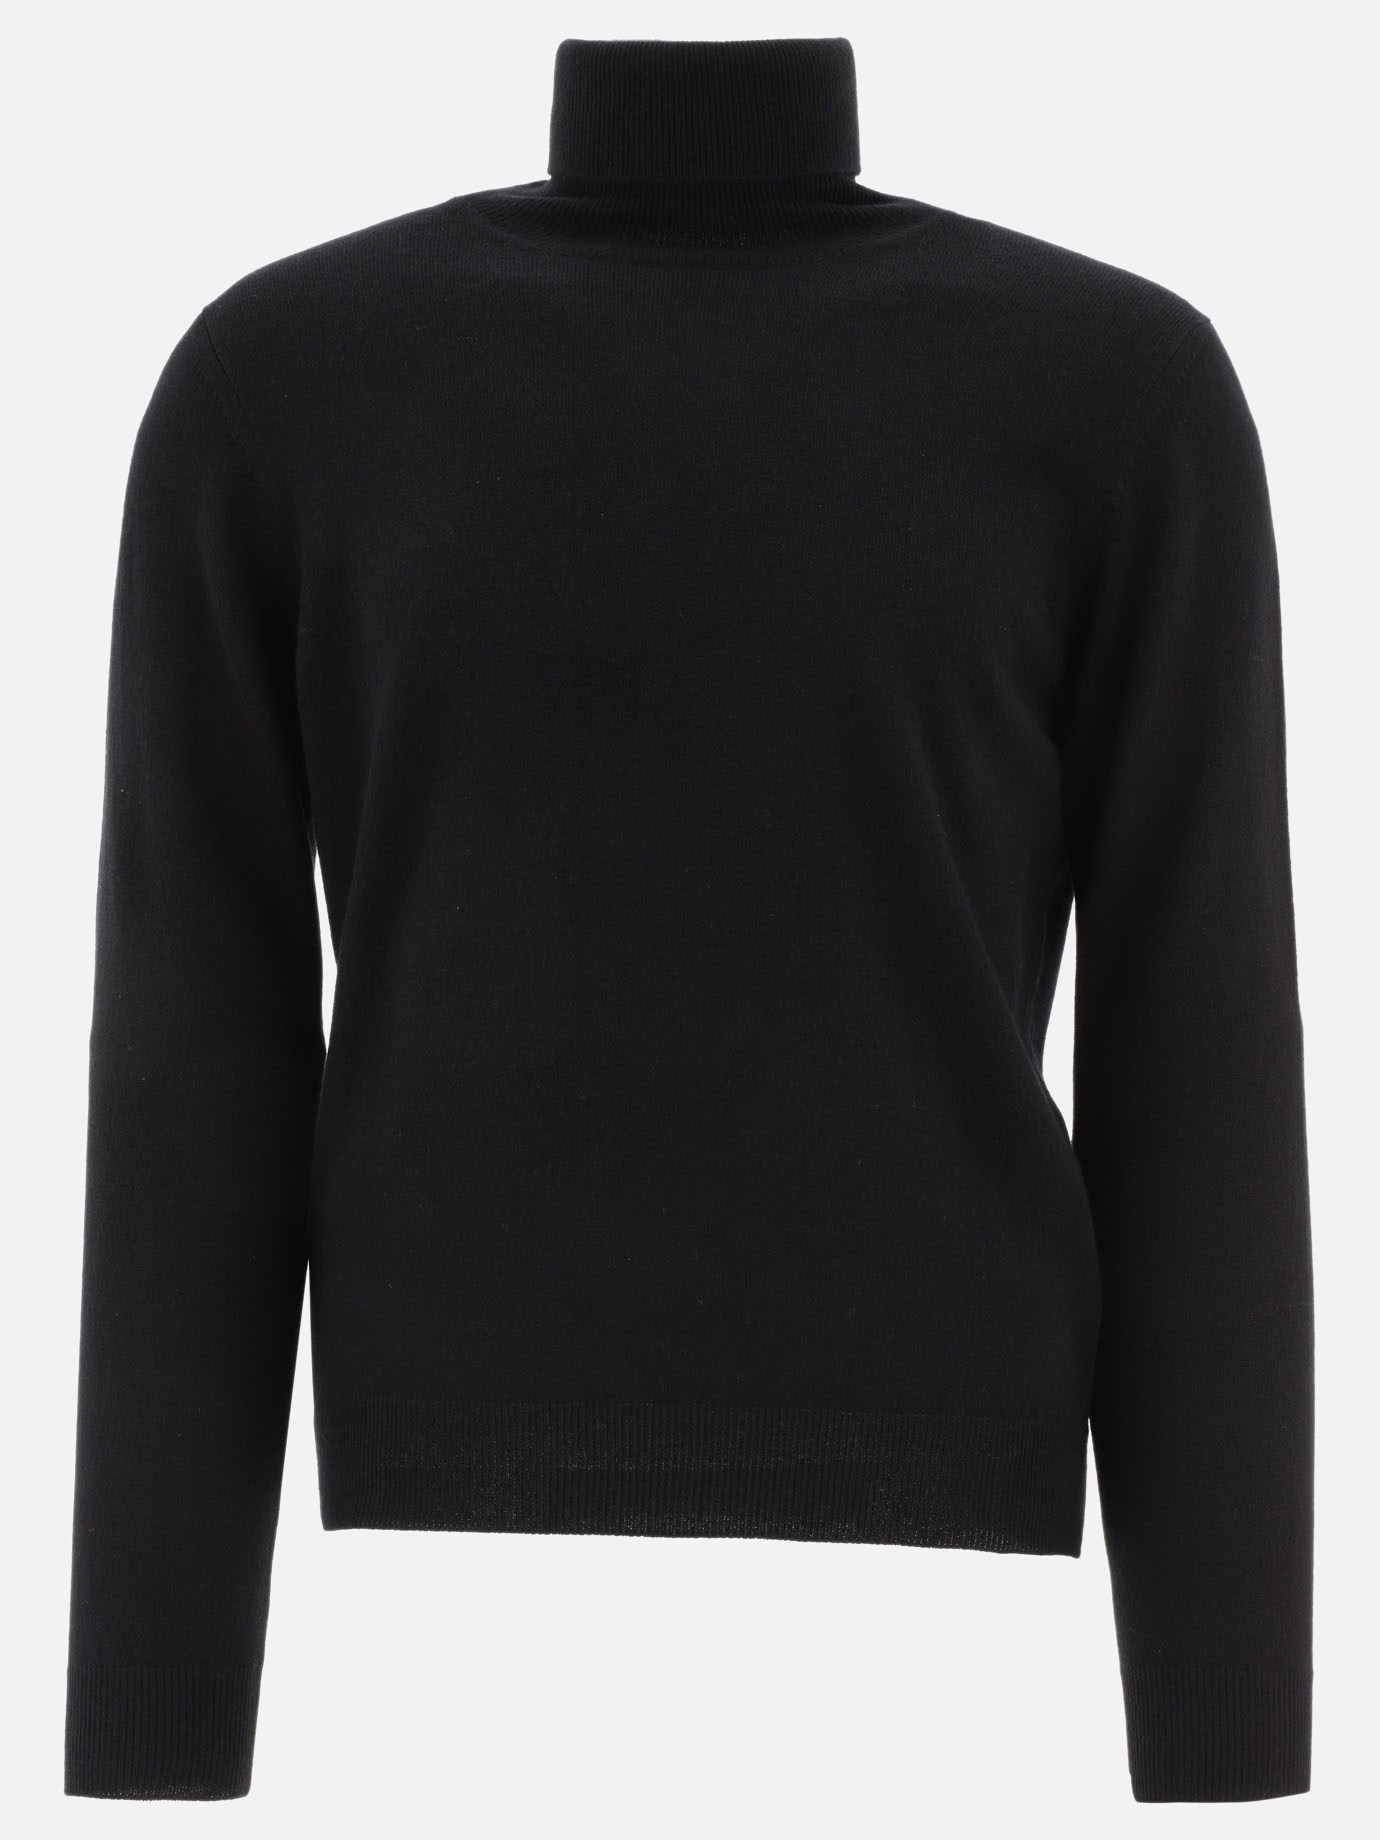 Ribbed turtleneck sweaterby Malo - 4